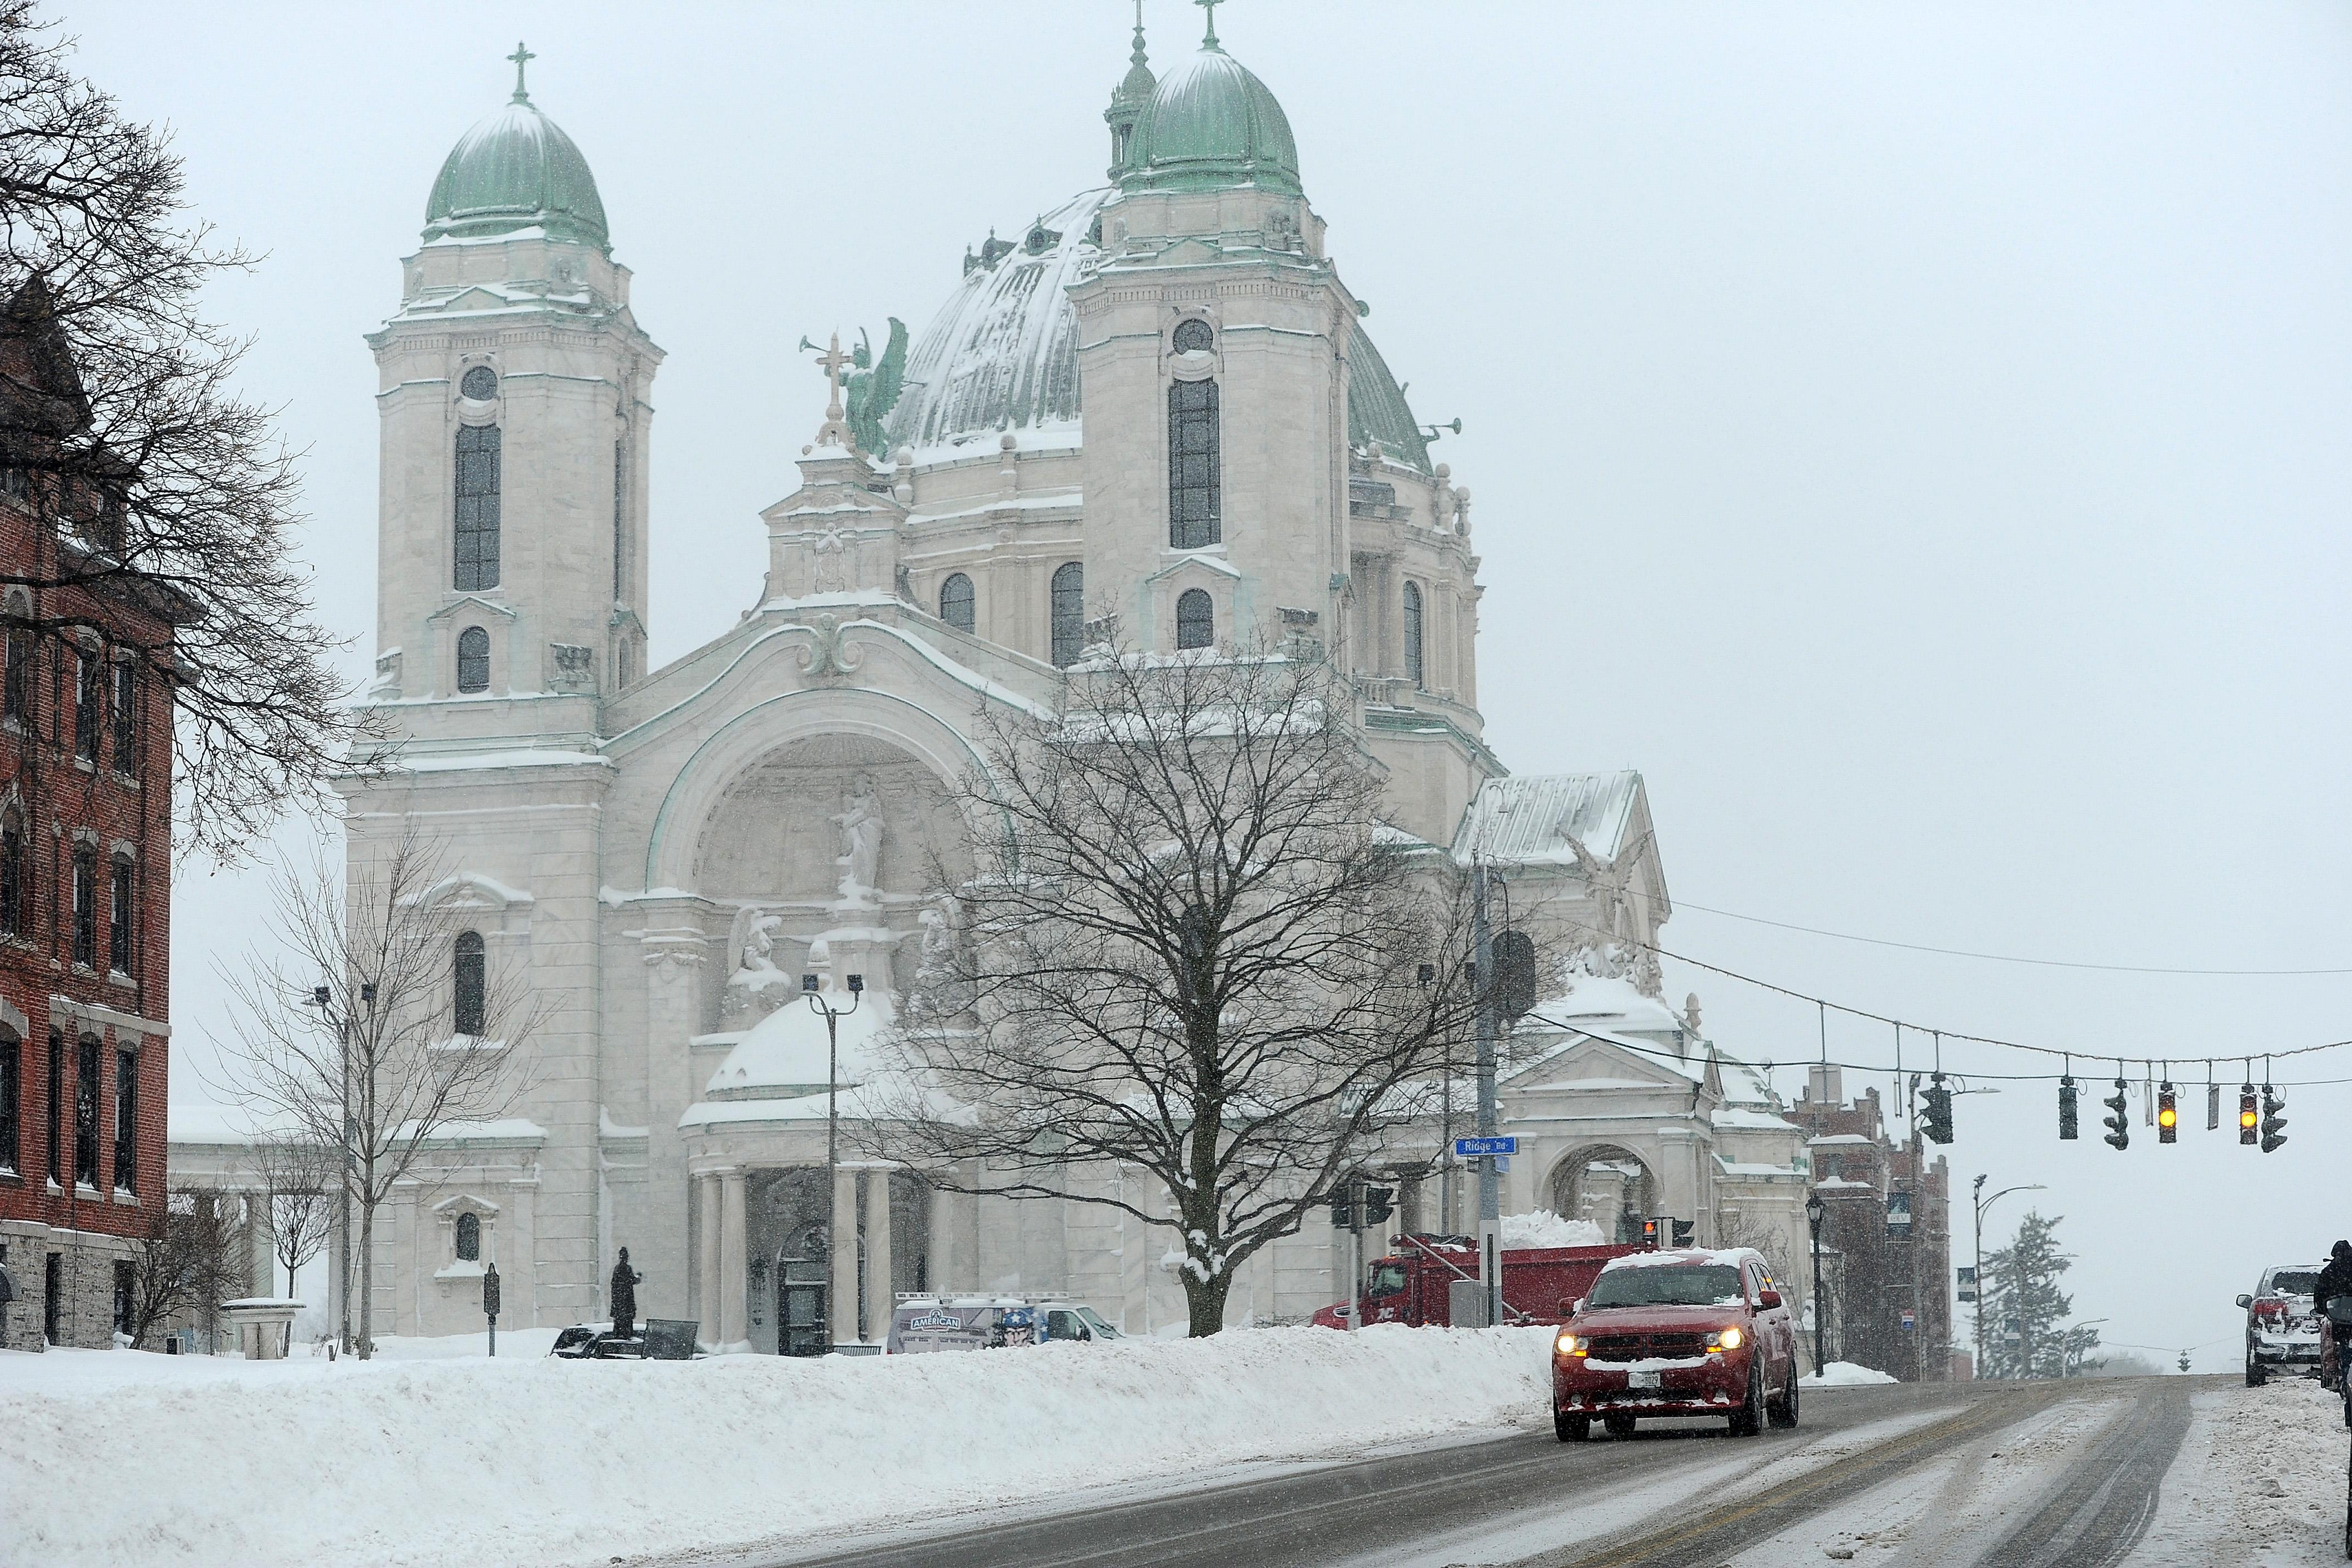 A car drives down a mostly clear road past a basilica with the ground covered in a thick layer of snow.